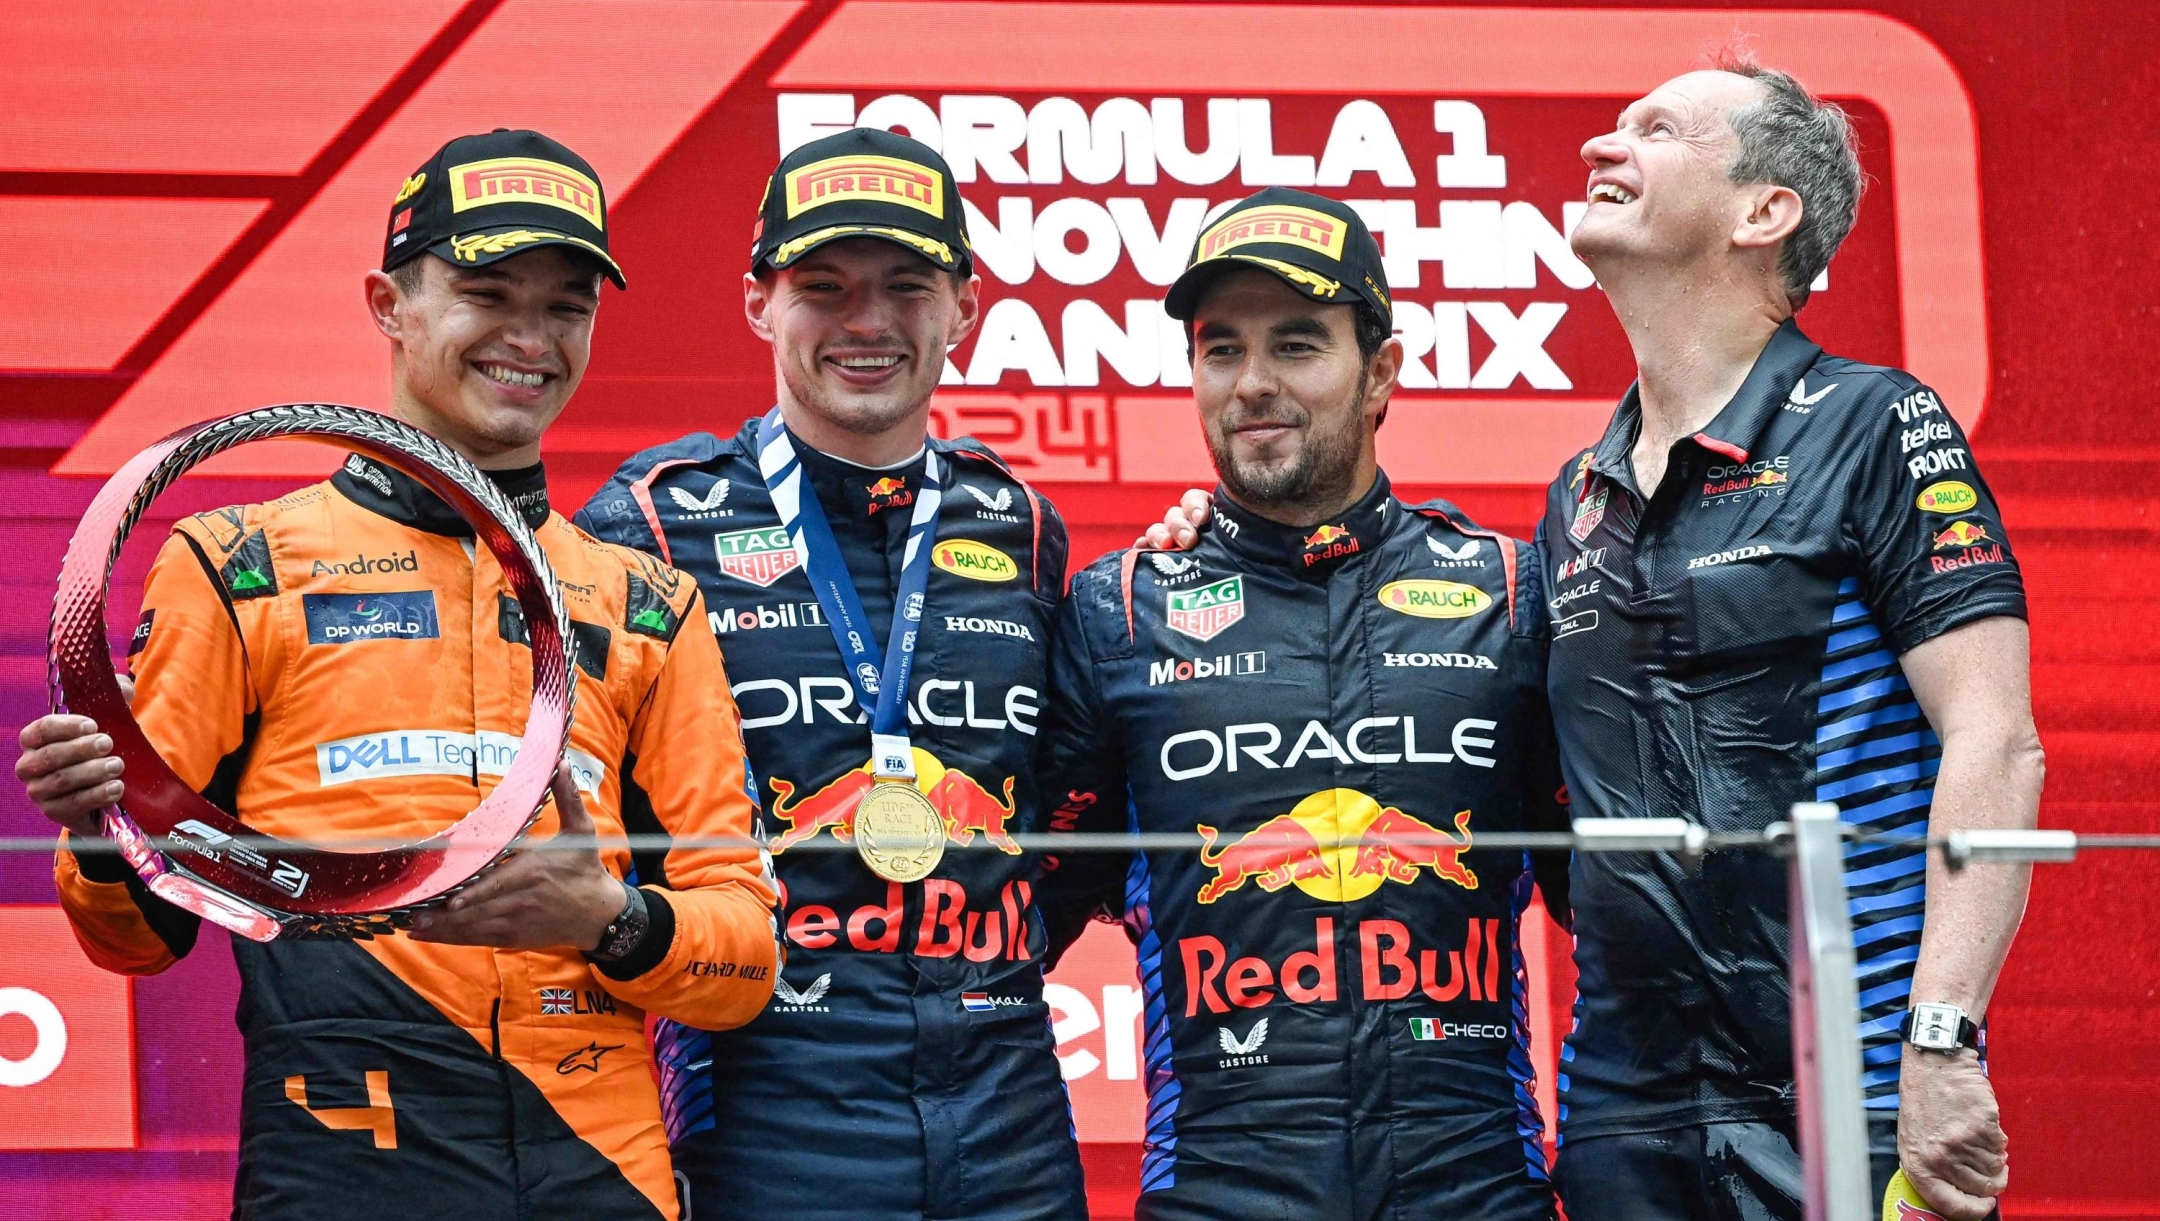 Winner Red Bull Racing's Dutch driver Max Verstappen (2nd L) celebrates on the podium with second-placed McLaren's British driver Lando Norris (L) and third-placed Red Bull Racing's Mexican driver Sergio Perez (2nd R) after the Formula One Chinese Grand Prix at the Shanghai International Circuit in Shanghai on April 21, 2024. (Photo by PEDRO PARDO / AFP)